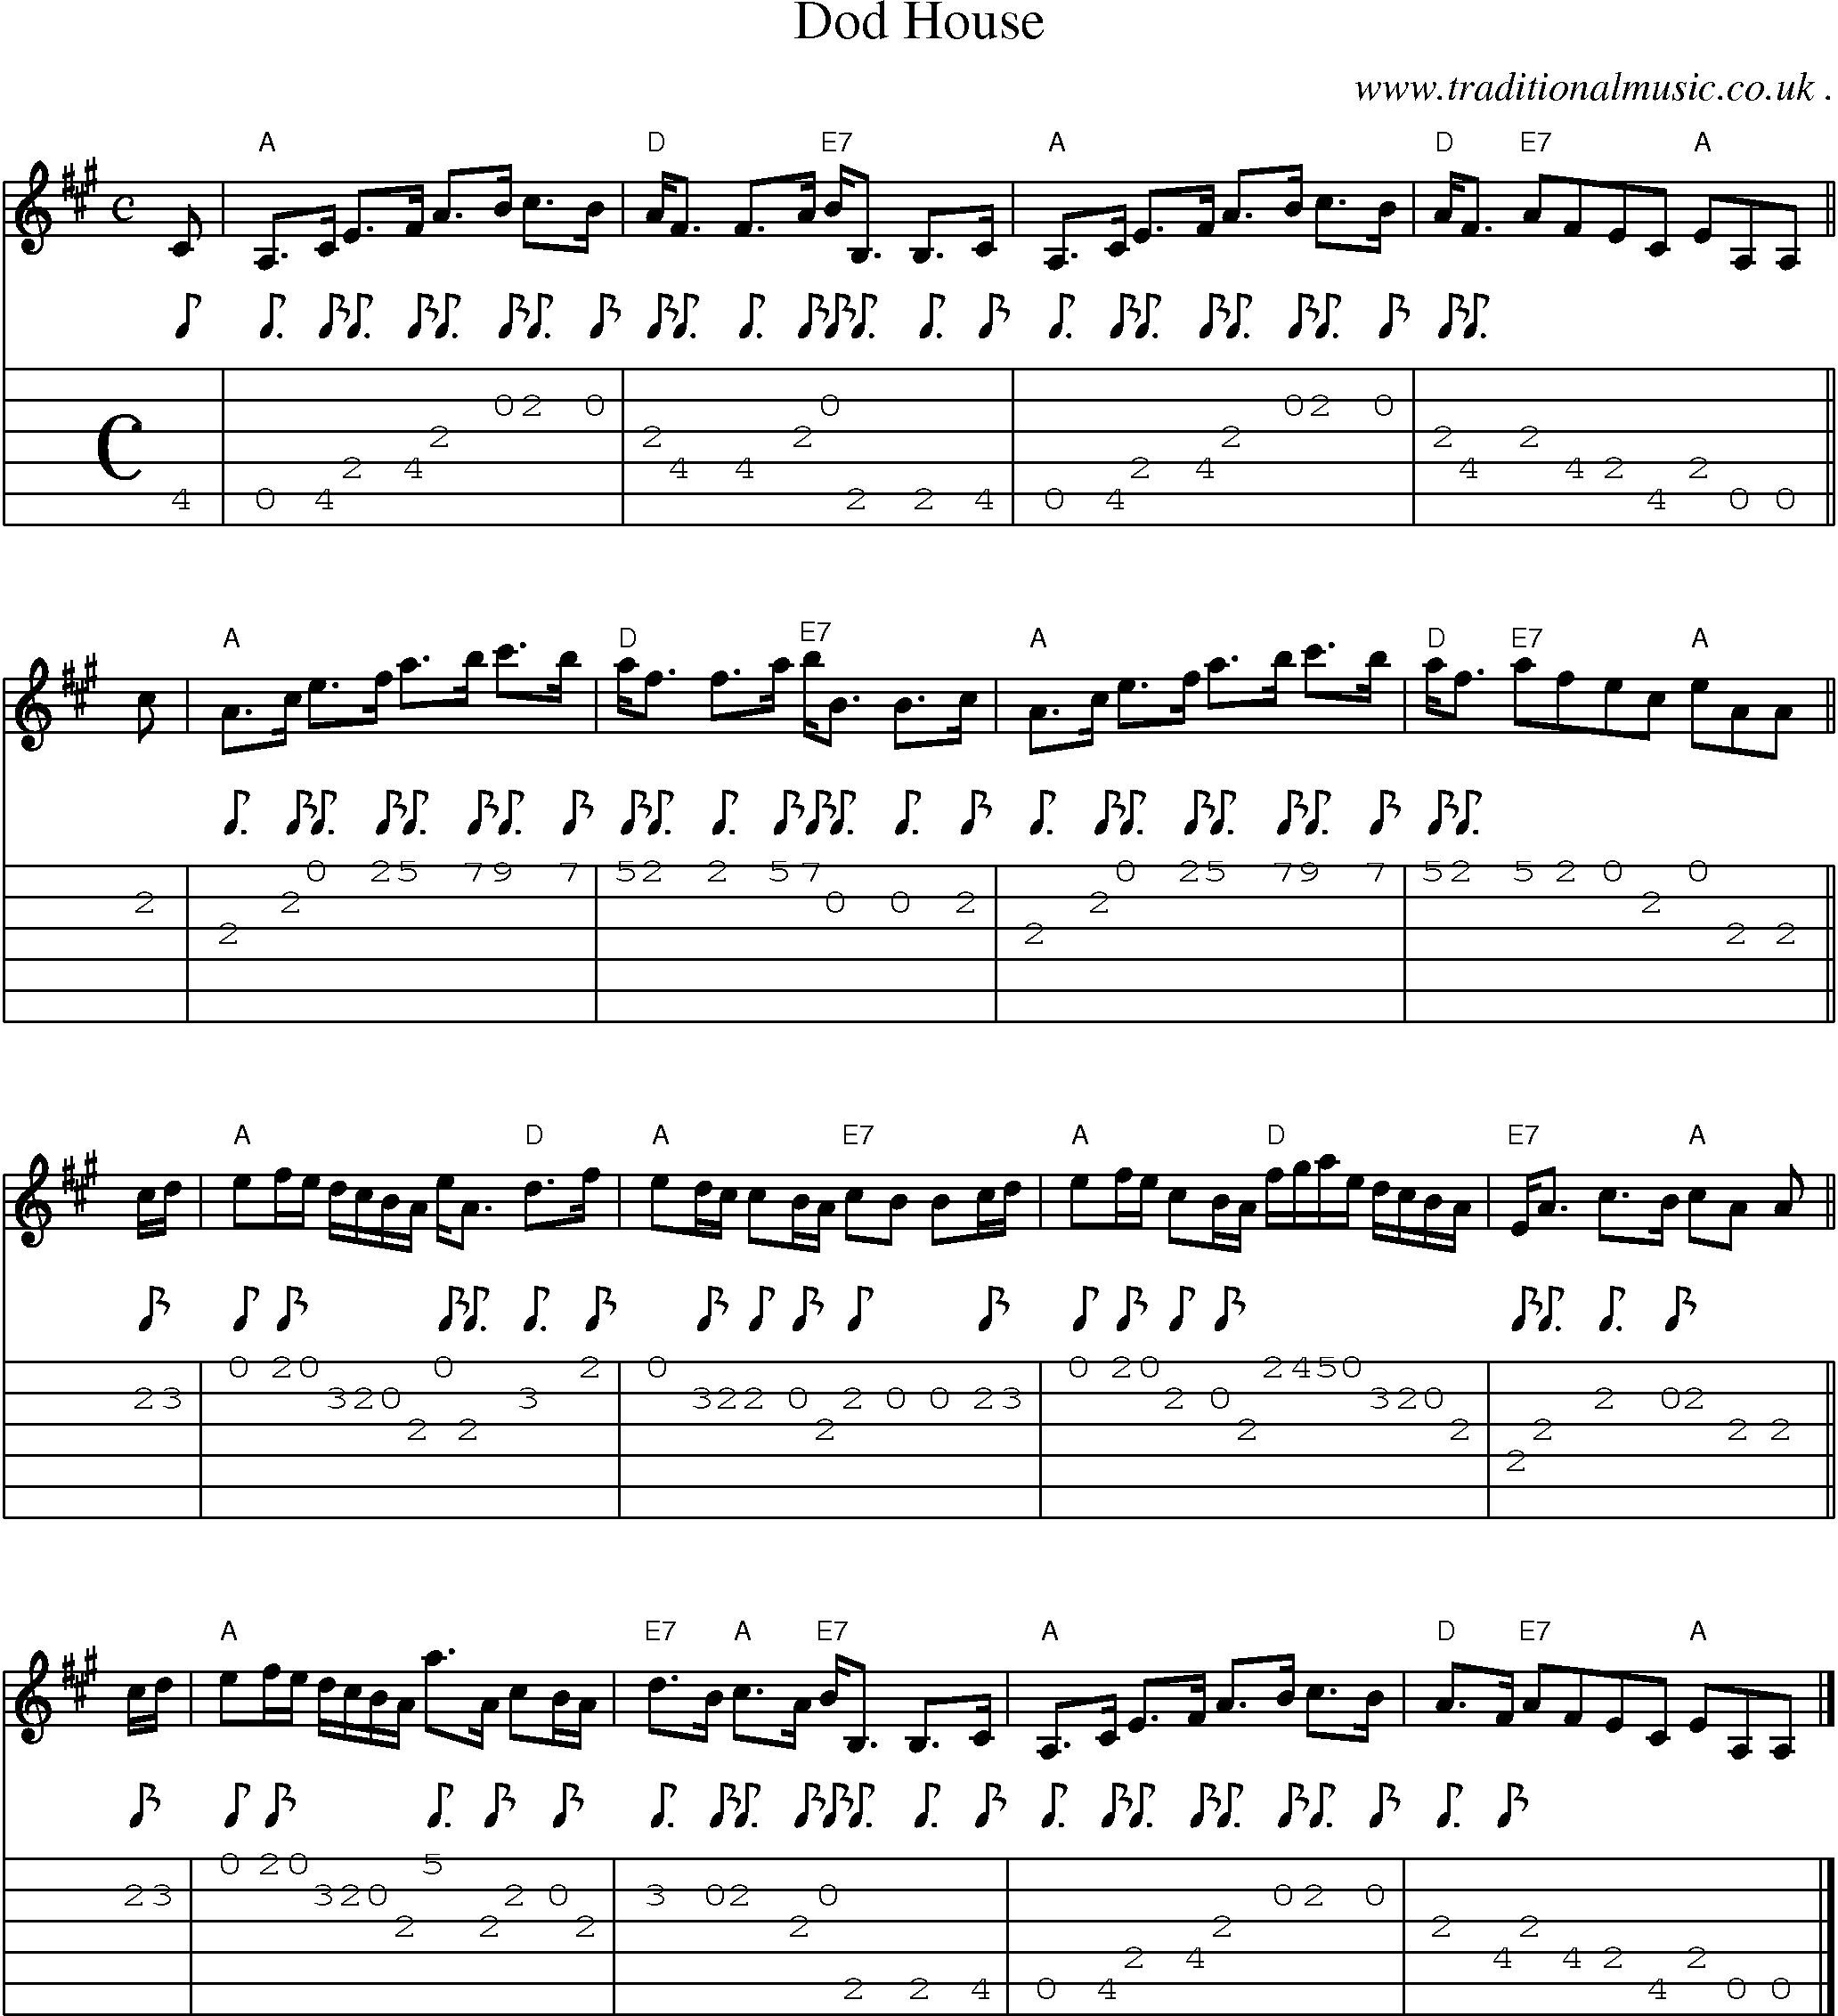 Sheet-music  score, Chords and Guitar Tabs for Dod House